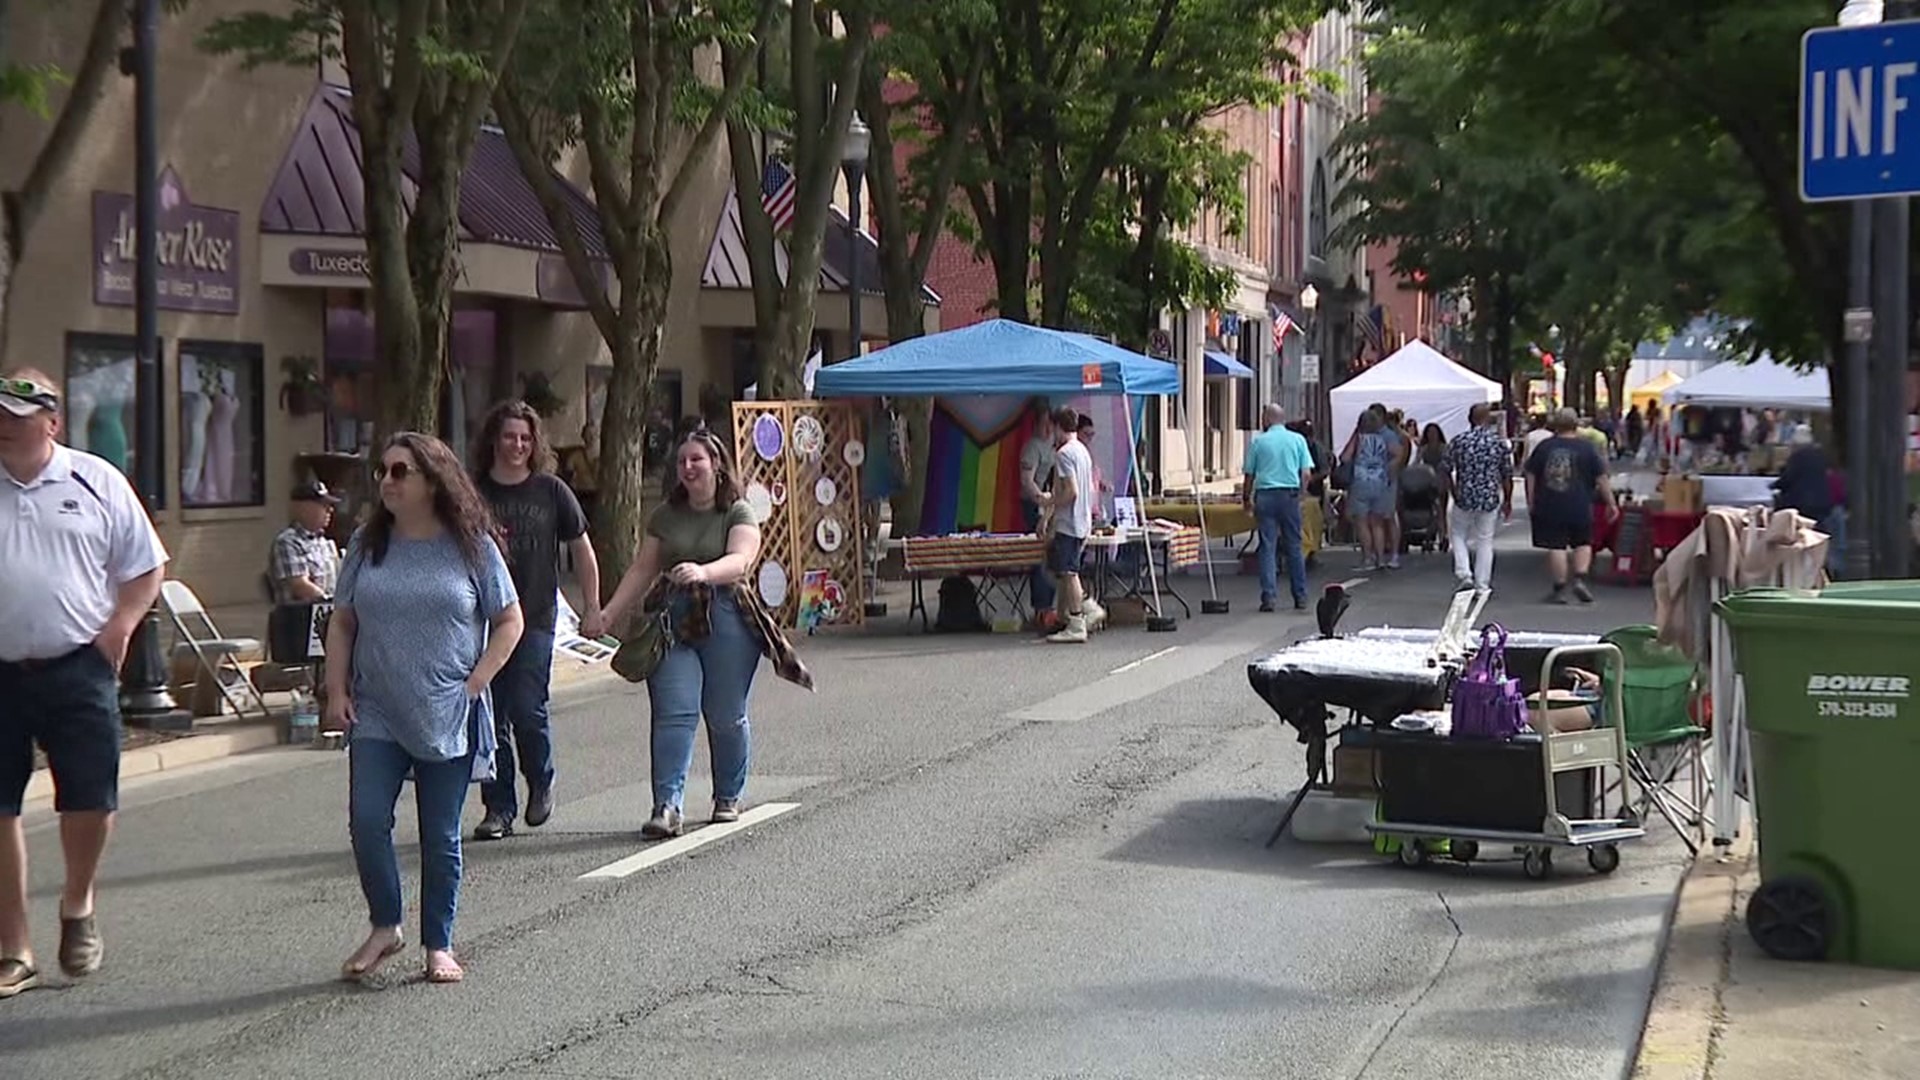 The event showcasing local artists took place in downtown Bill Town.